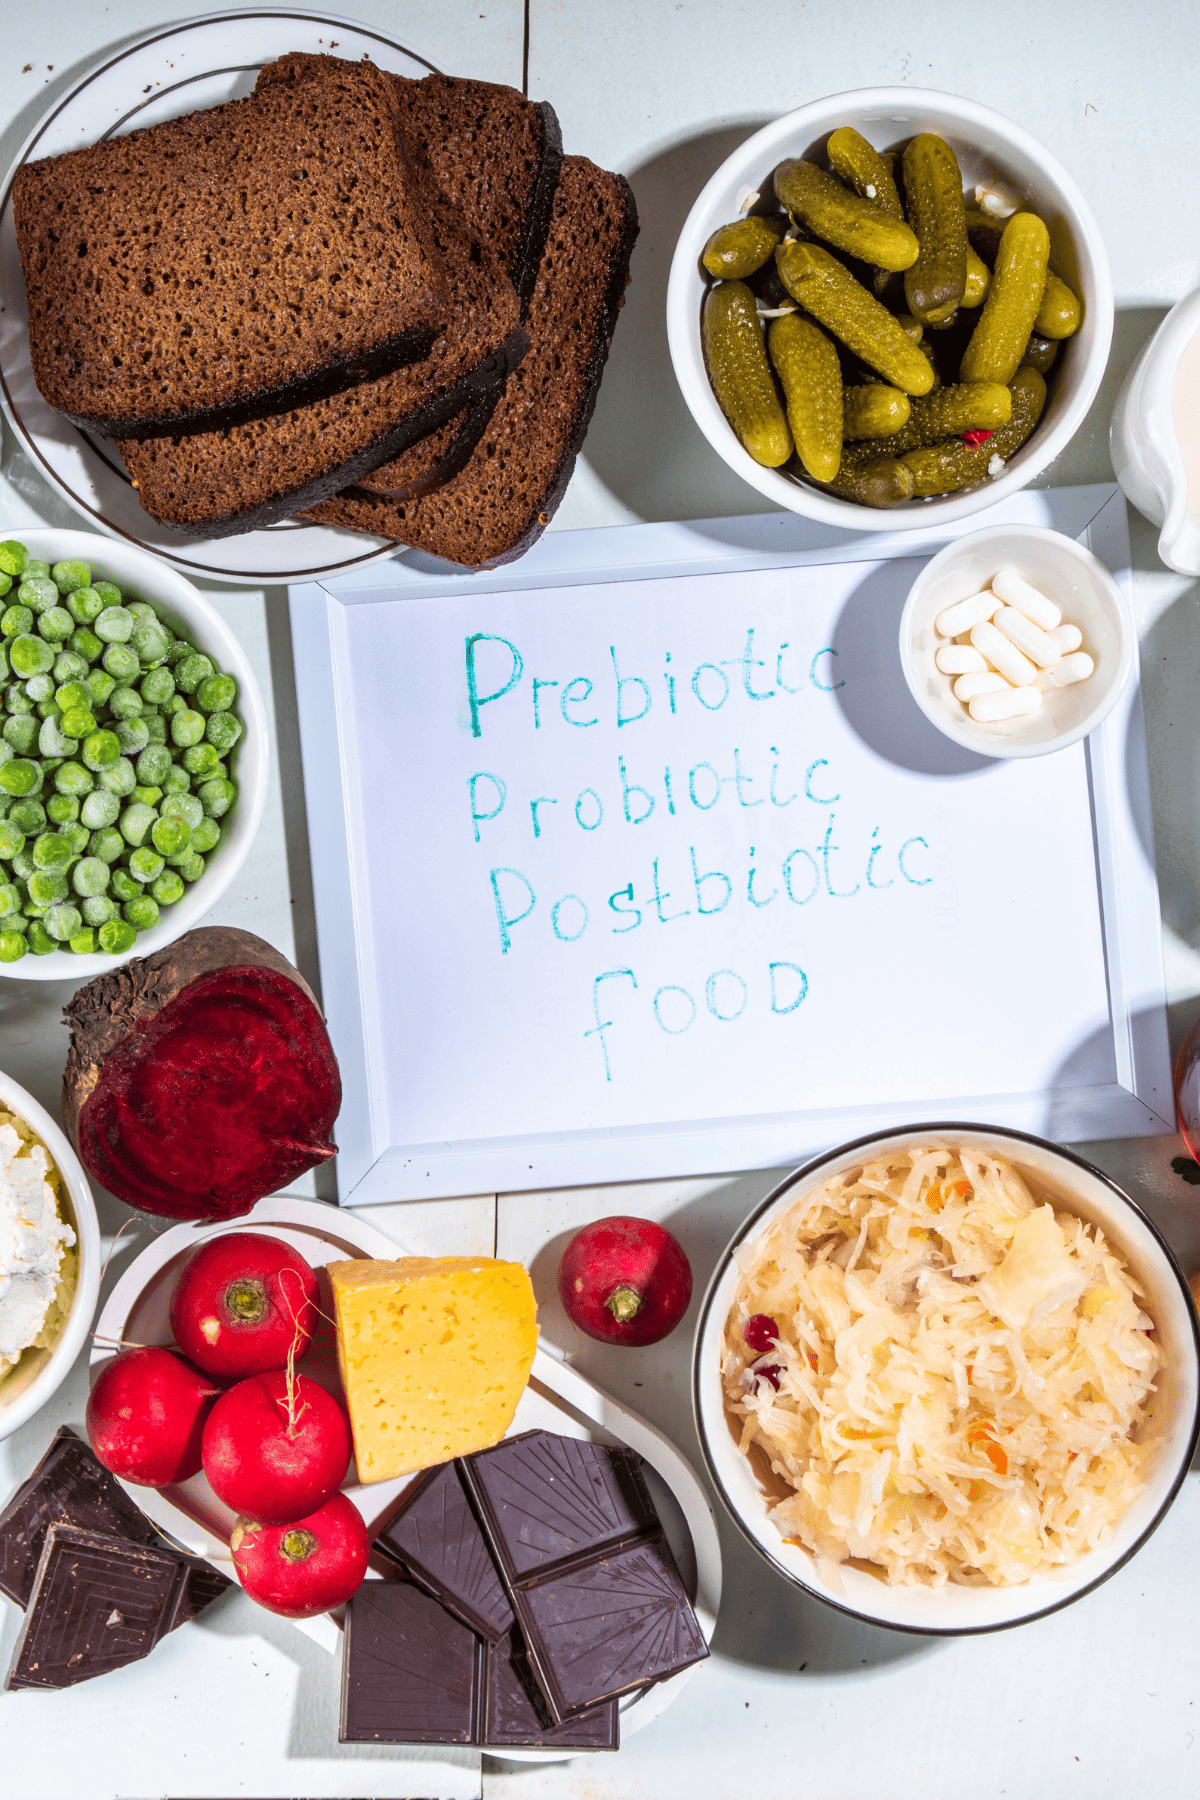 a sign with prebiotic, probiotic, and posbiotic foods and also foods around it.